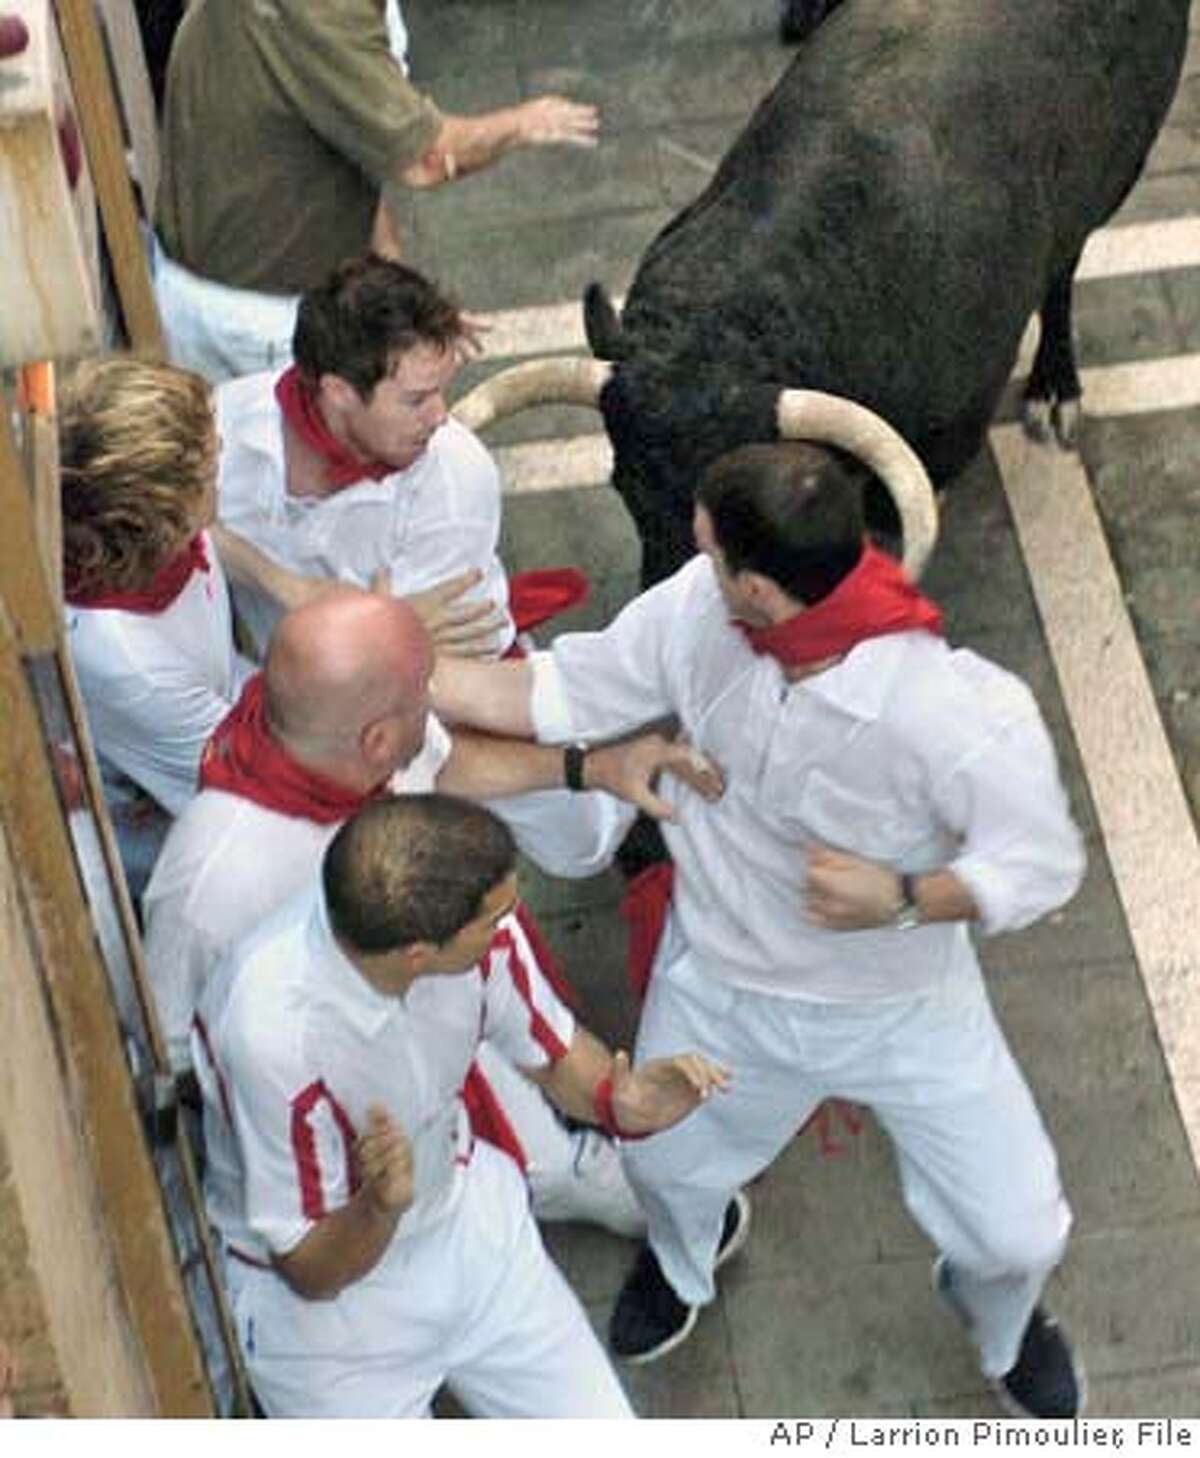 ** CORRECTS SPELLING TO LAWRENCE ** U.S. brothers Lawrence, left, and Michael Lenahan are seen an instant before being gored at the same time by a fighting bull during a traditional bull run in Pamplona, Spain, Thursday July 12, 2007. The two brothers were gored Thursday during the longest and bloodiest morning bull run at the San Fermin festival in the northeastern city of Pamplona. Lawrence Lenahan, 26, of Hermosa Beach, Calif. and Michael Lenahan, 23, of Philadelphia, Pa. were gored by a bull who strayed from the pack, turned around and ran the wrong way. (AP Photo/ Larrion Pimoulier) EFE OUT, PHOTO MADE AVAILABLE FRIDAY JULY 13, 2007 CORRECTS SPELLING TO LAWRENCE